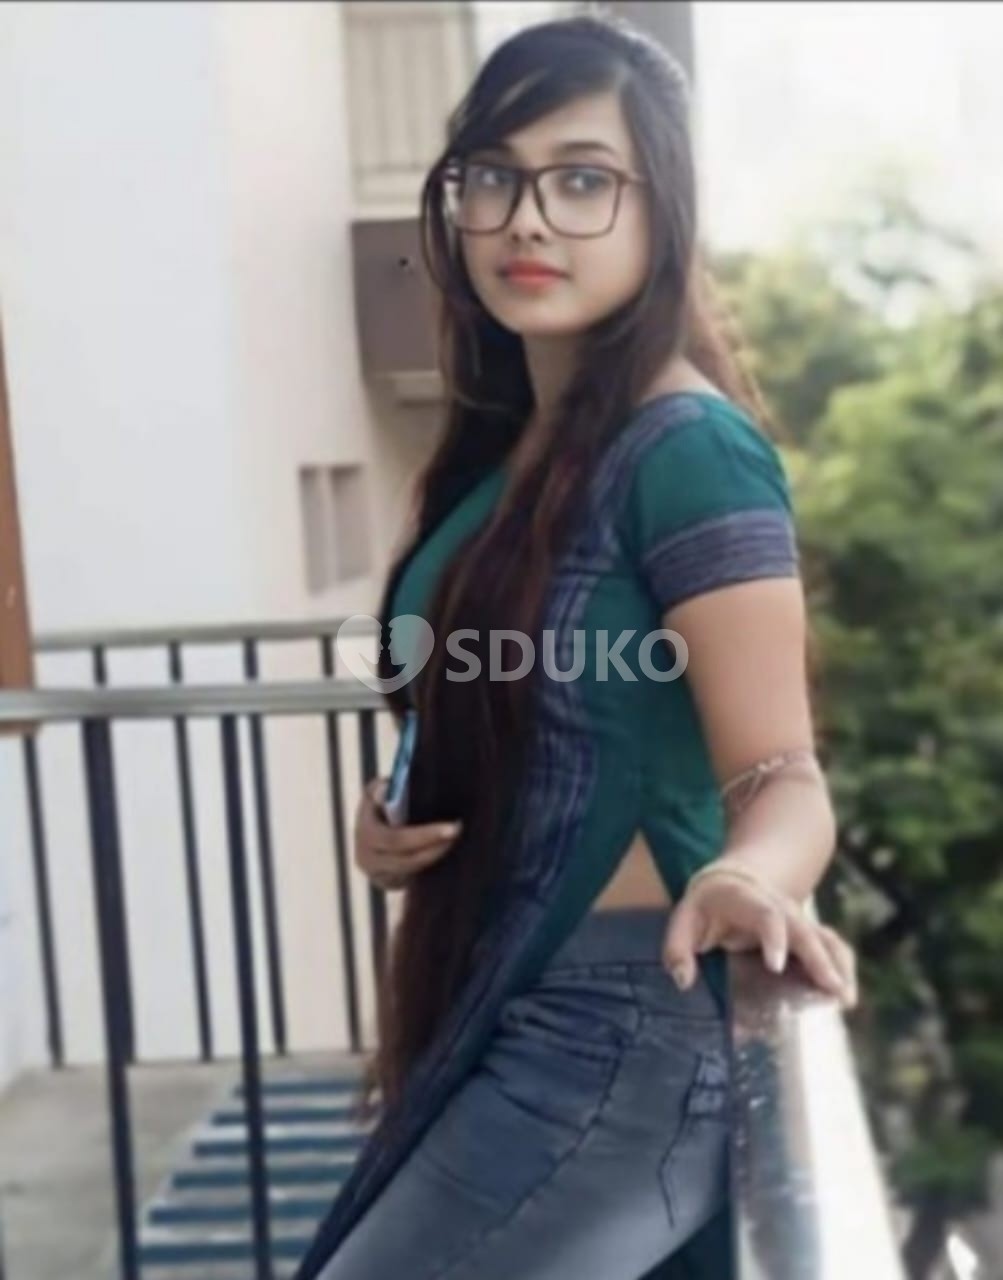 Kottayam 💙🔥.,,,.TODAY LOW PRICE 💯 SAFE AND SECURE SERVICE INCALL OUTCALL AVAILABLE CALL ME